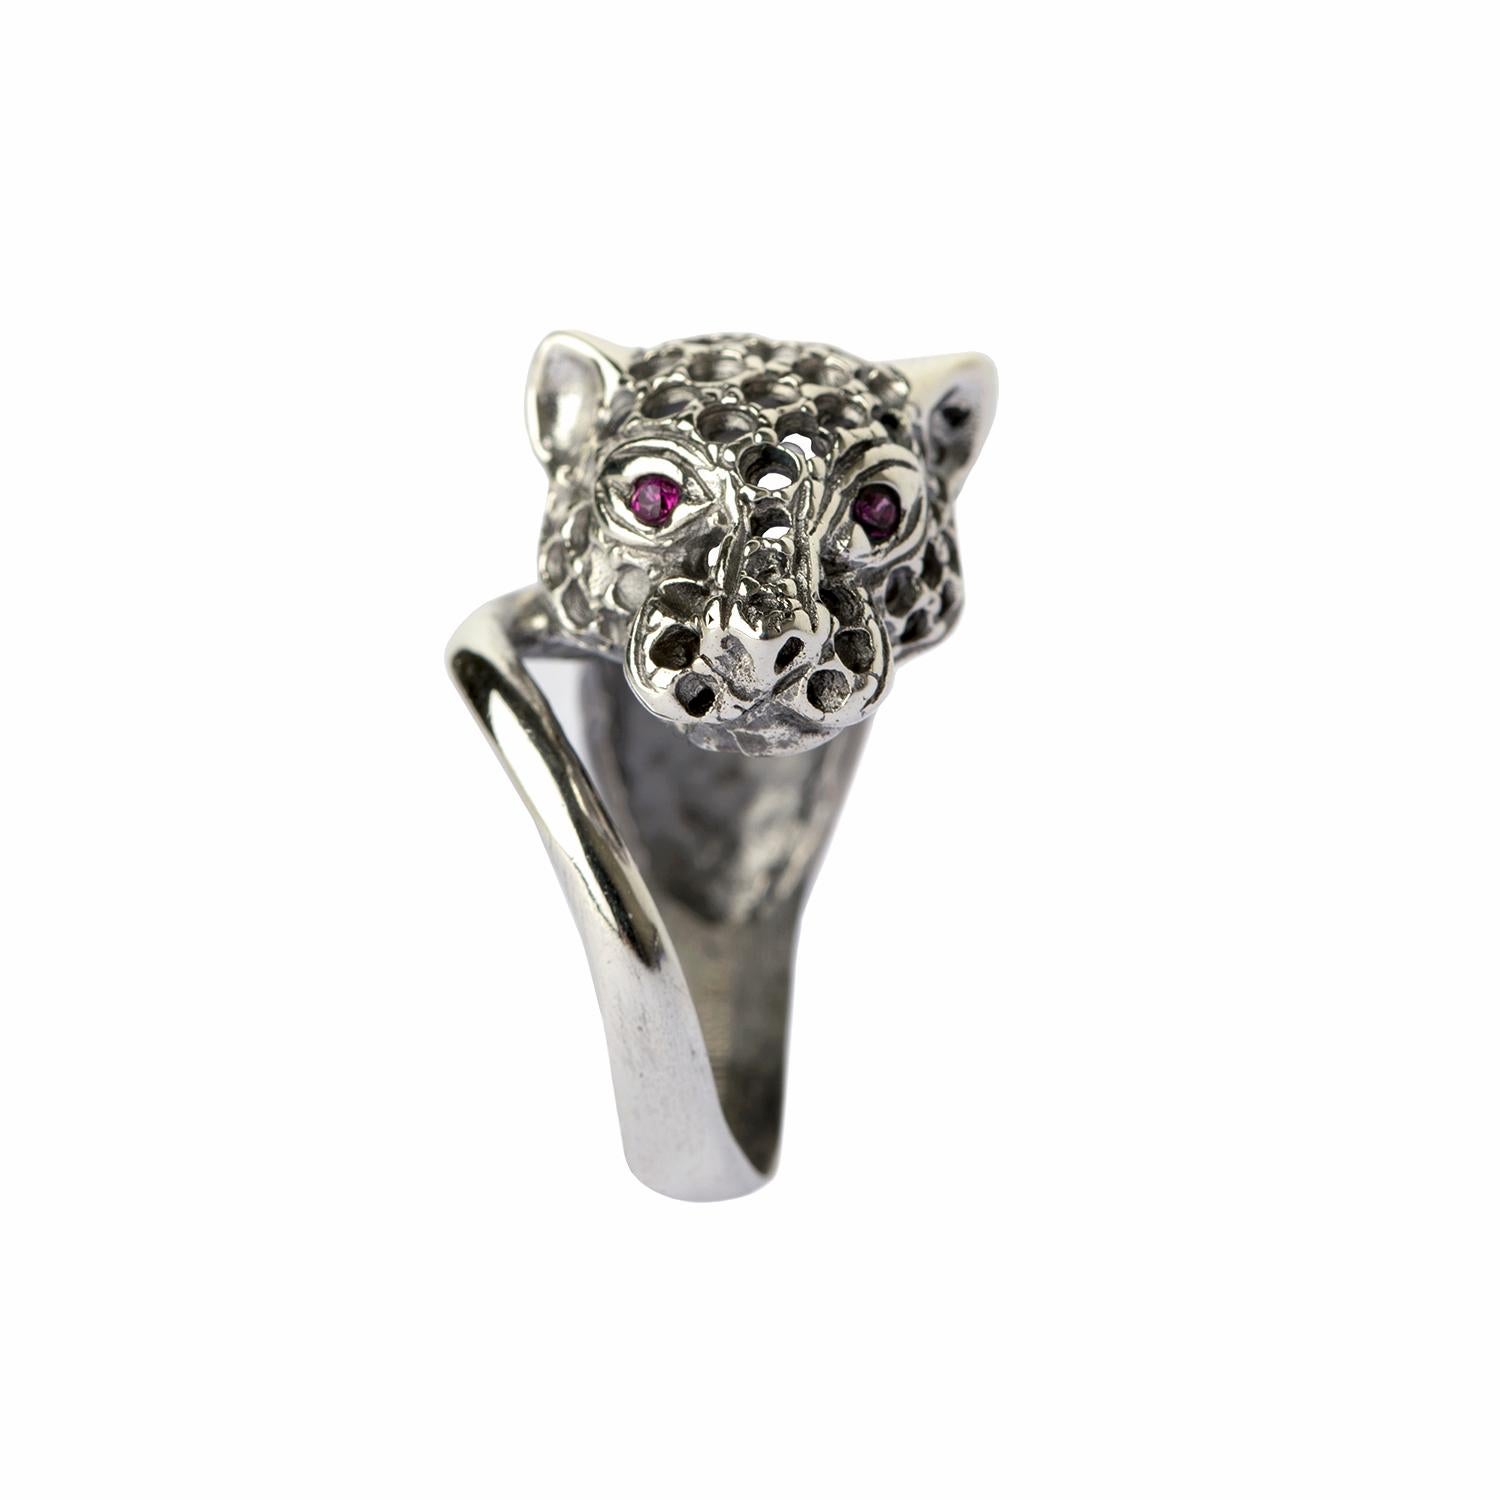 The quintessential icon of Iosselliani, the Panther's head refresh the idea of the engagement ring with its intriguing animal-inspired look. Hand crafted in antique silver, the ring is encrusted with red zircon as the panther's eyes. Wear it by